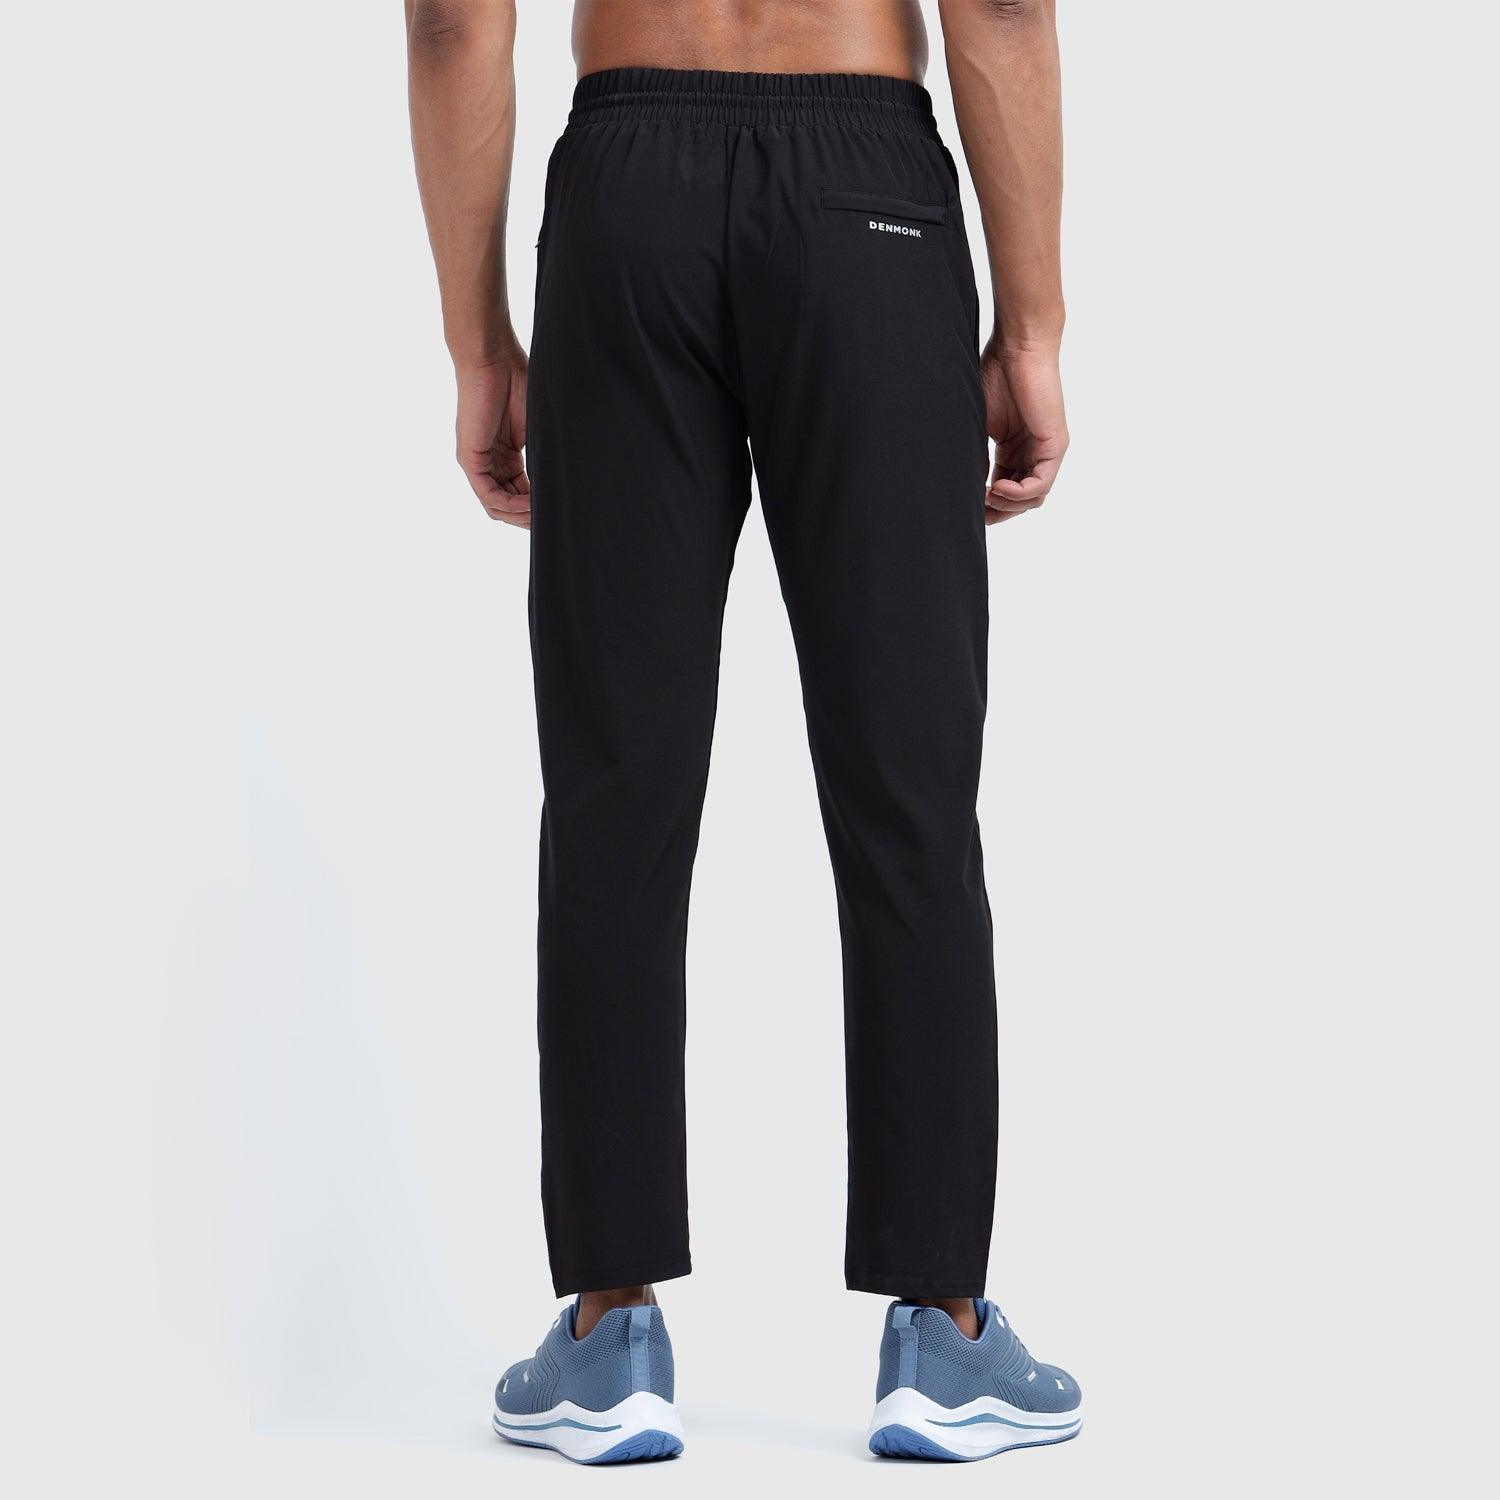 Denmonk: Elevate your look with these Stayactive sharp black Trackpant for mens.